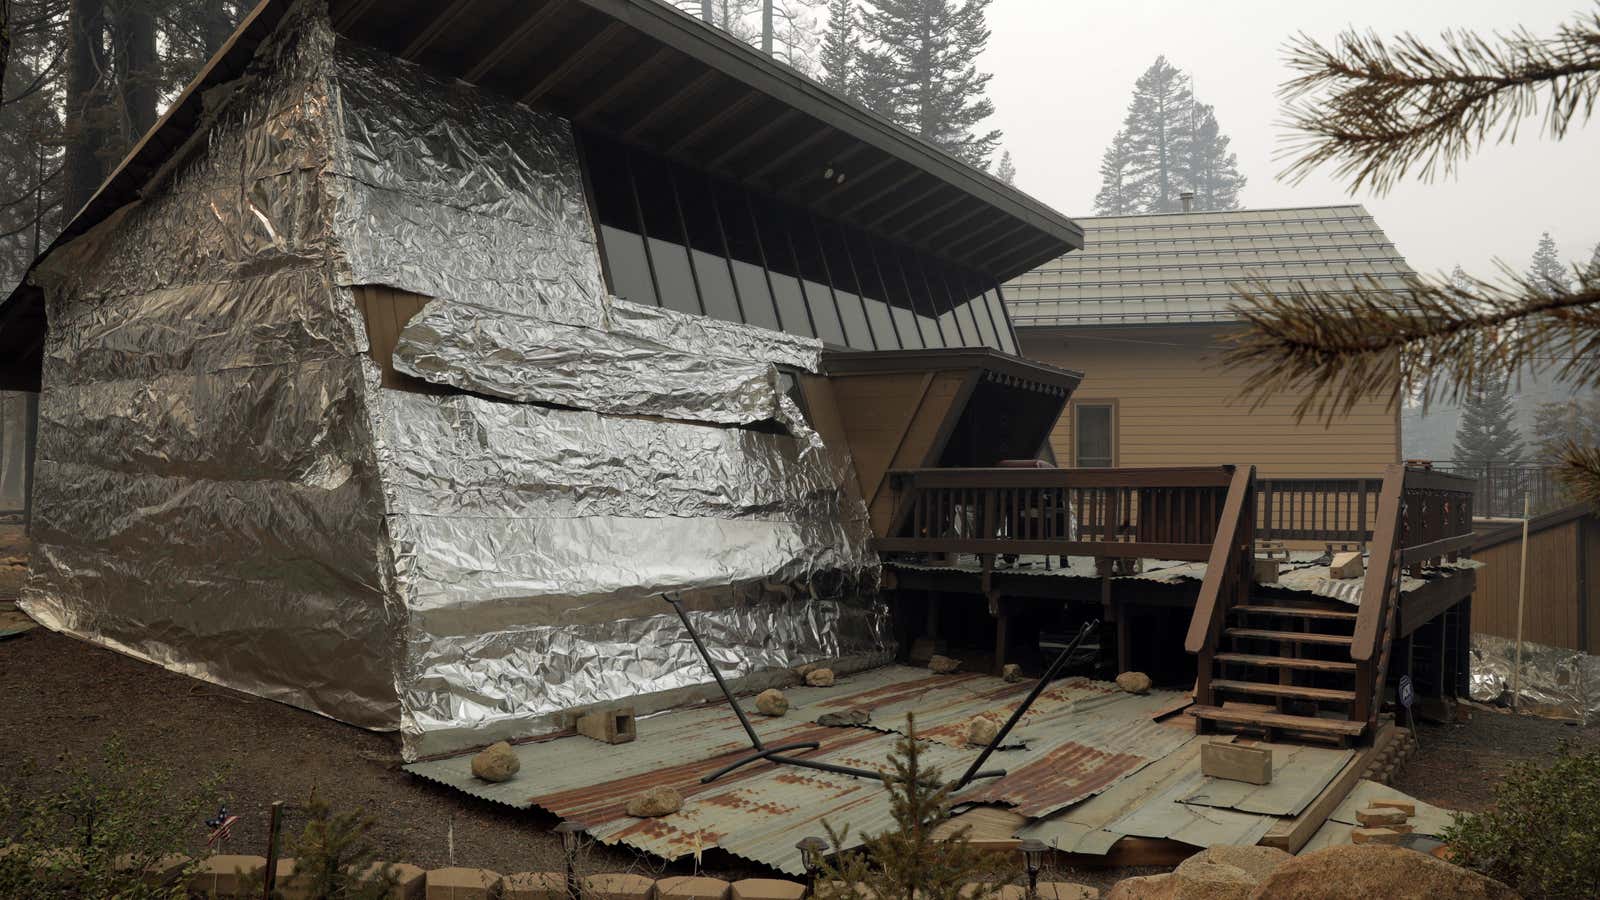 Can Aluminum Foil Really Protect Your Home in a Fire?